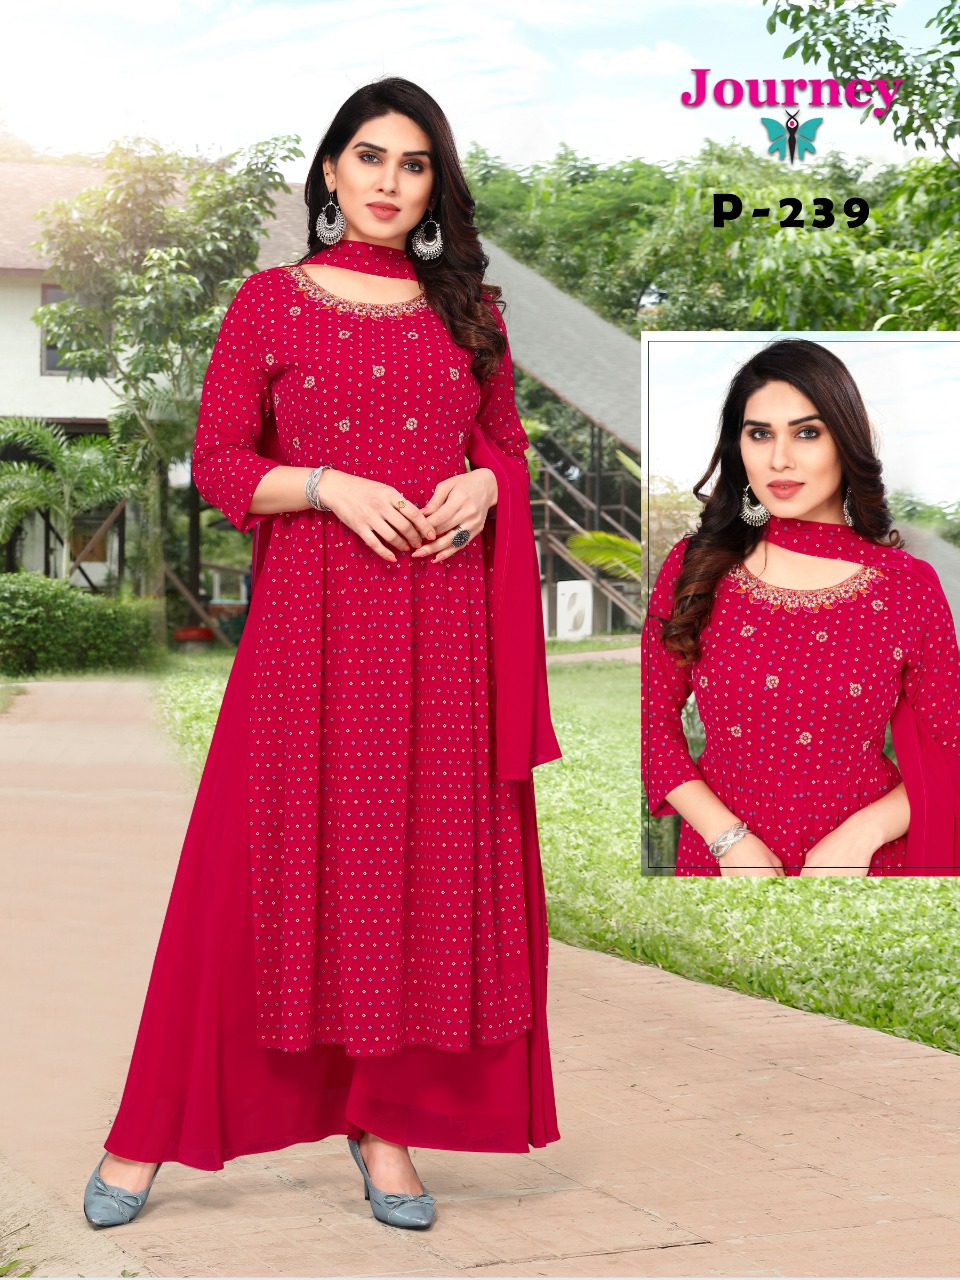 P 239 And 240 Journey Design Readymade Plazzo Style Suits